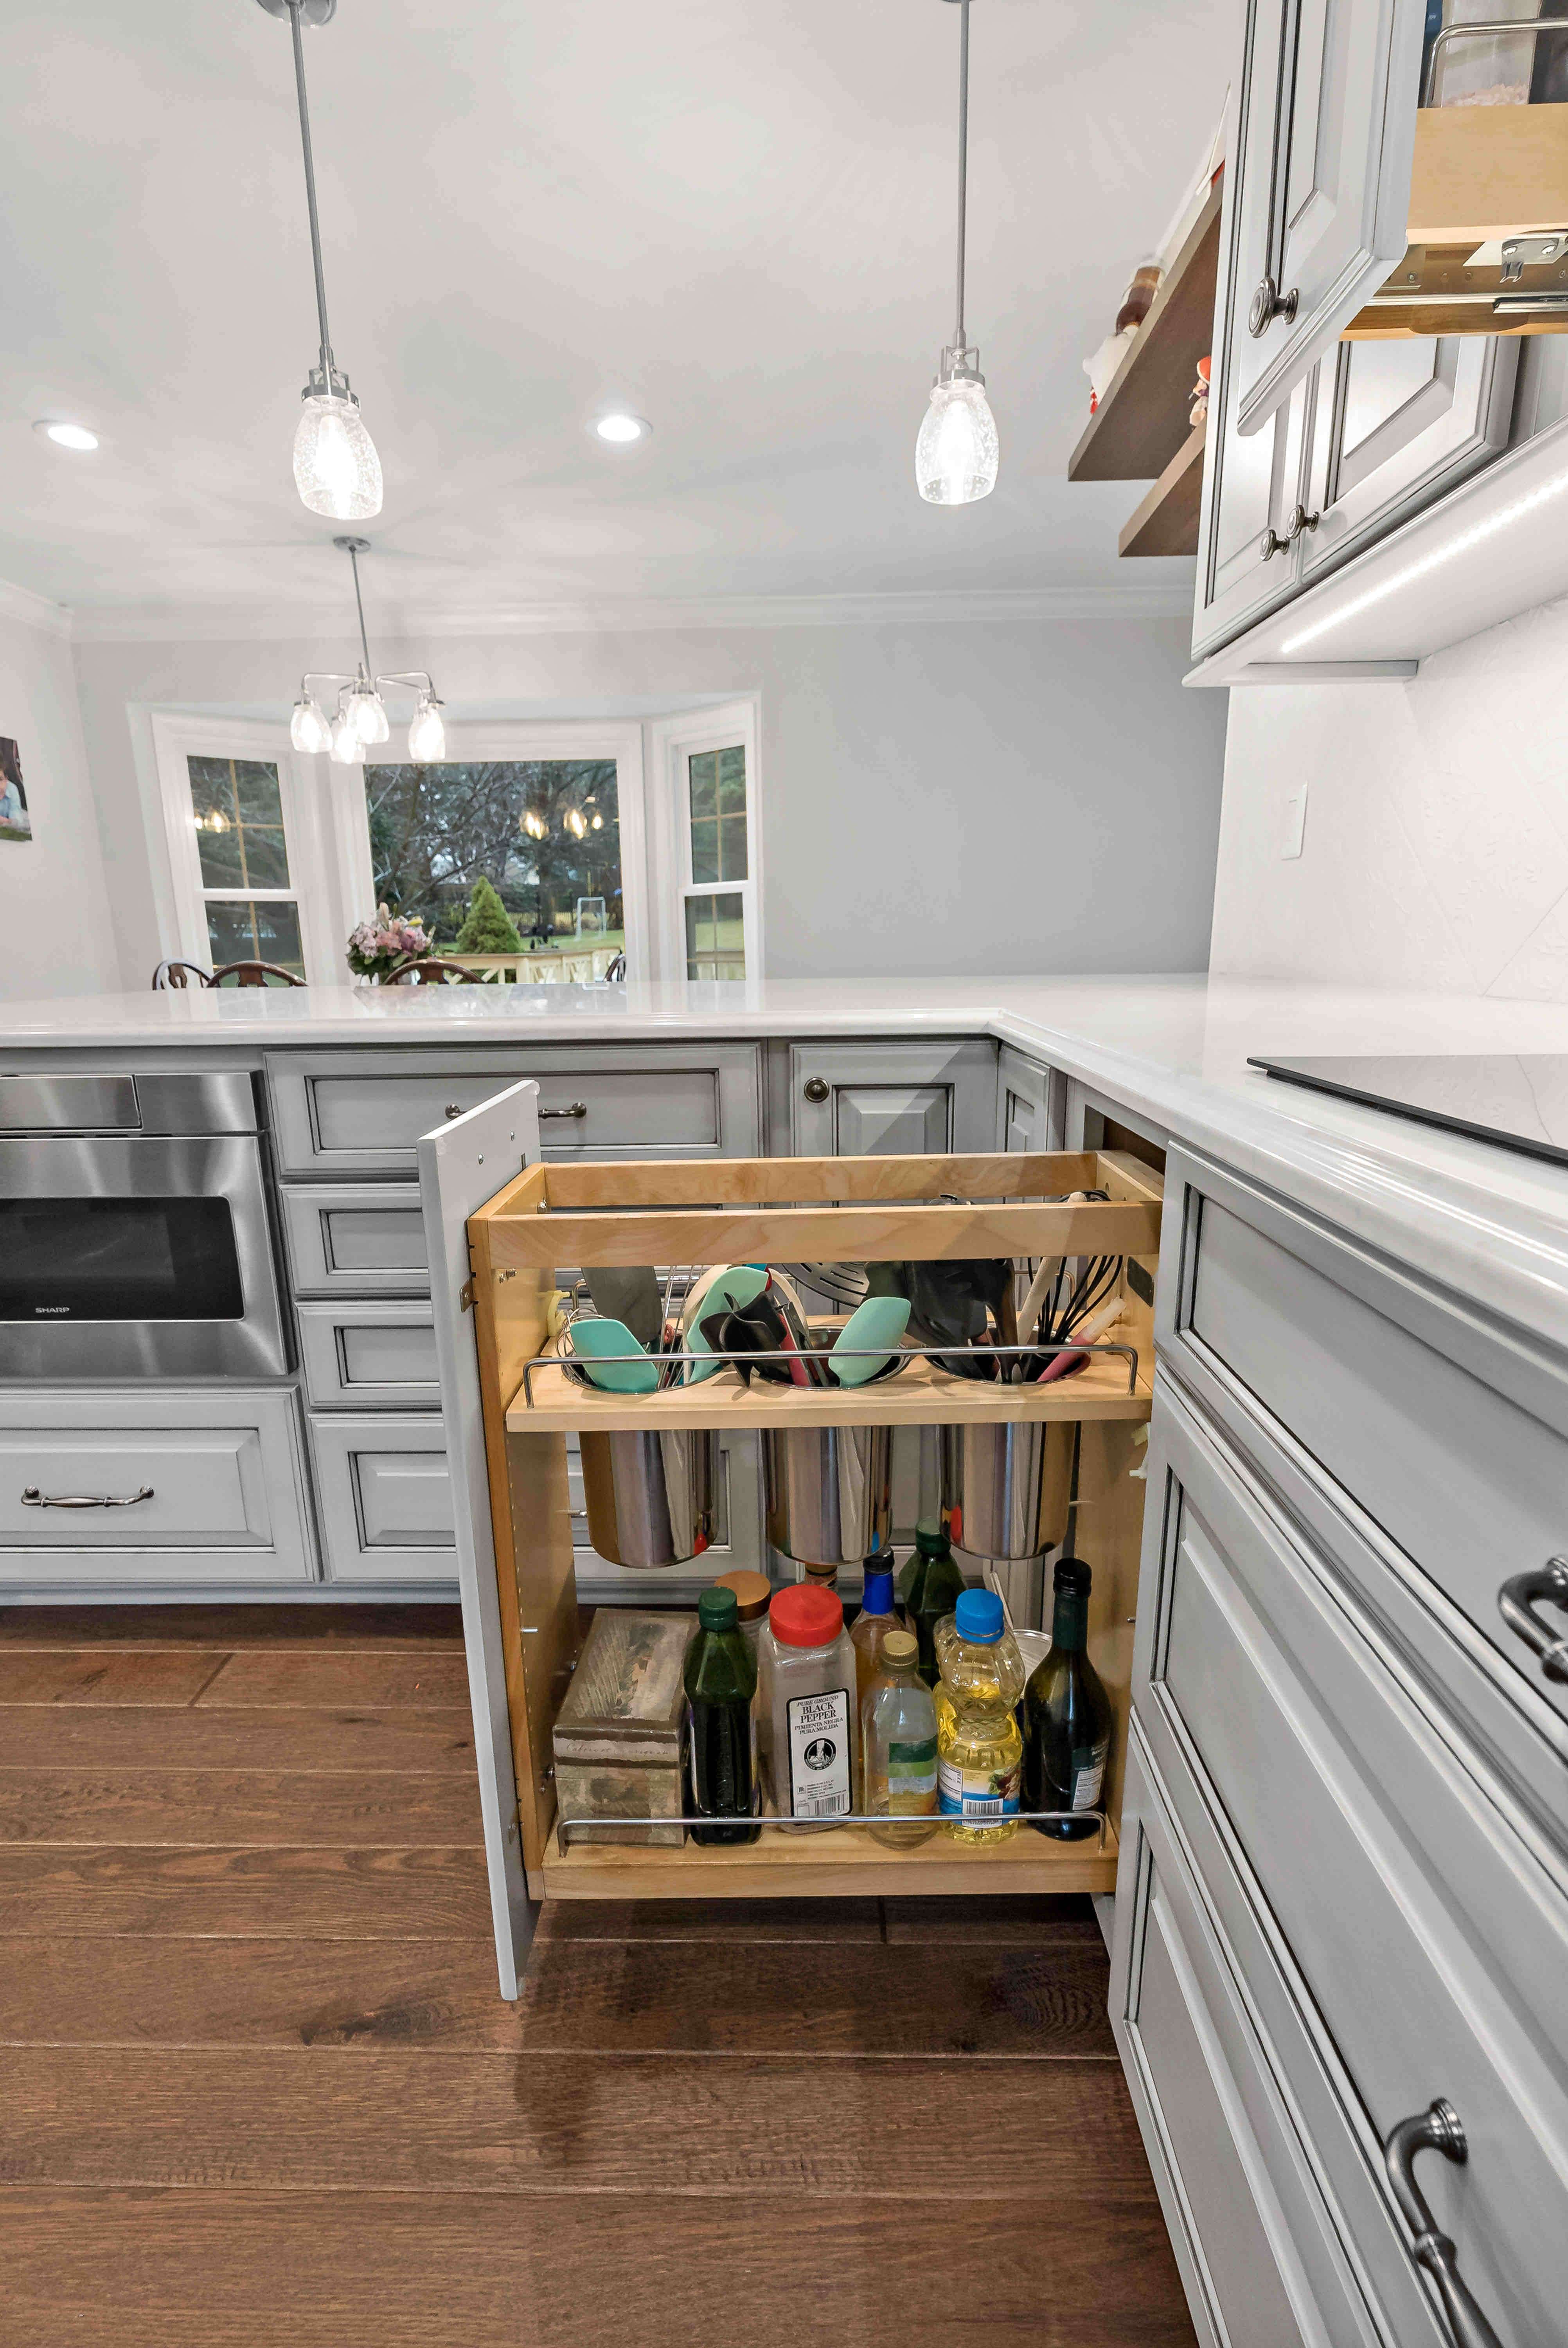 Custom cabinetry pull-out cupboards for kitchen organization